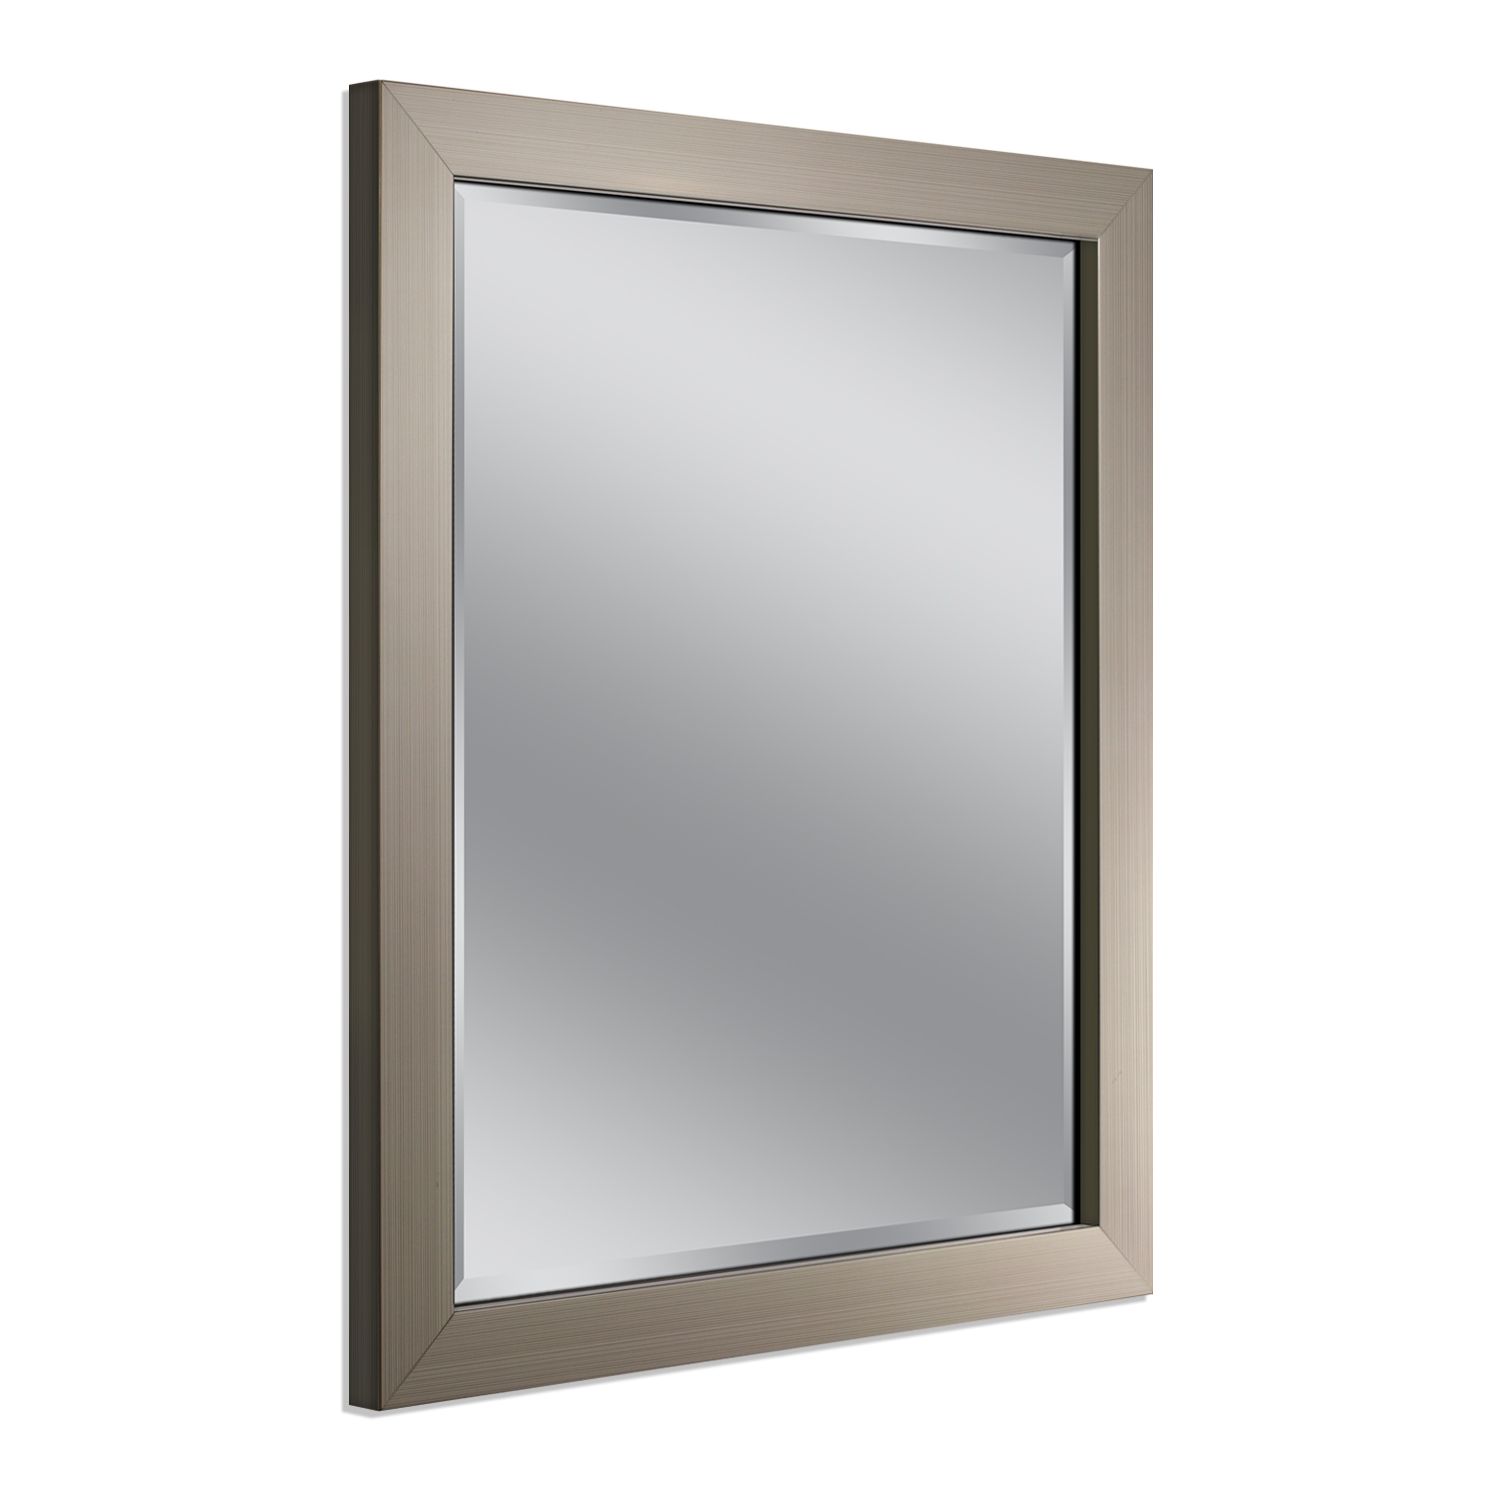 Image for Head West Modern Brushed Nickel Wall Mirror at Kohl's.